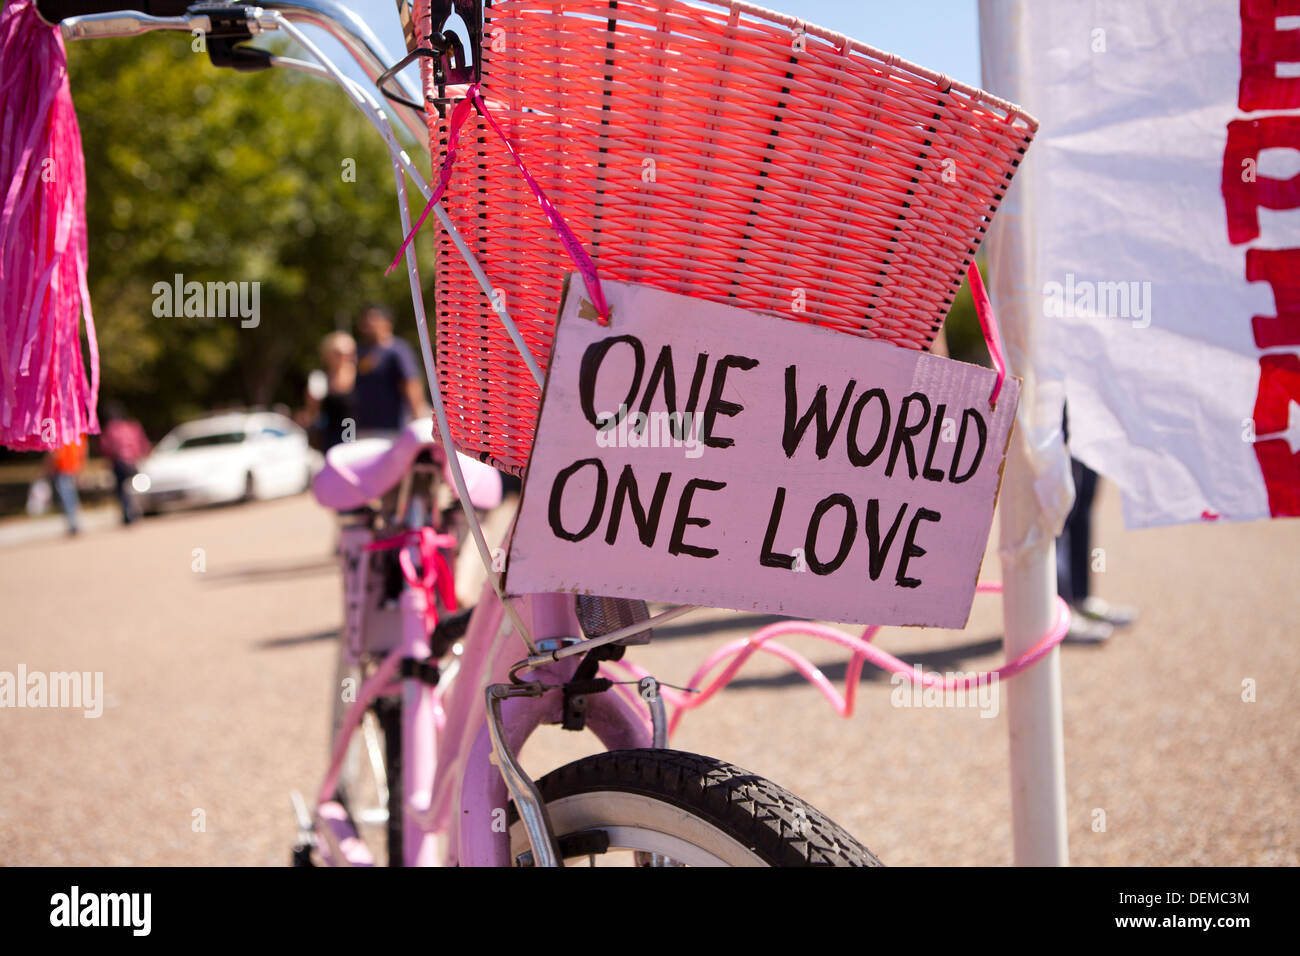 One World One Love sign on pink bicycle Stock Photo